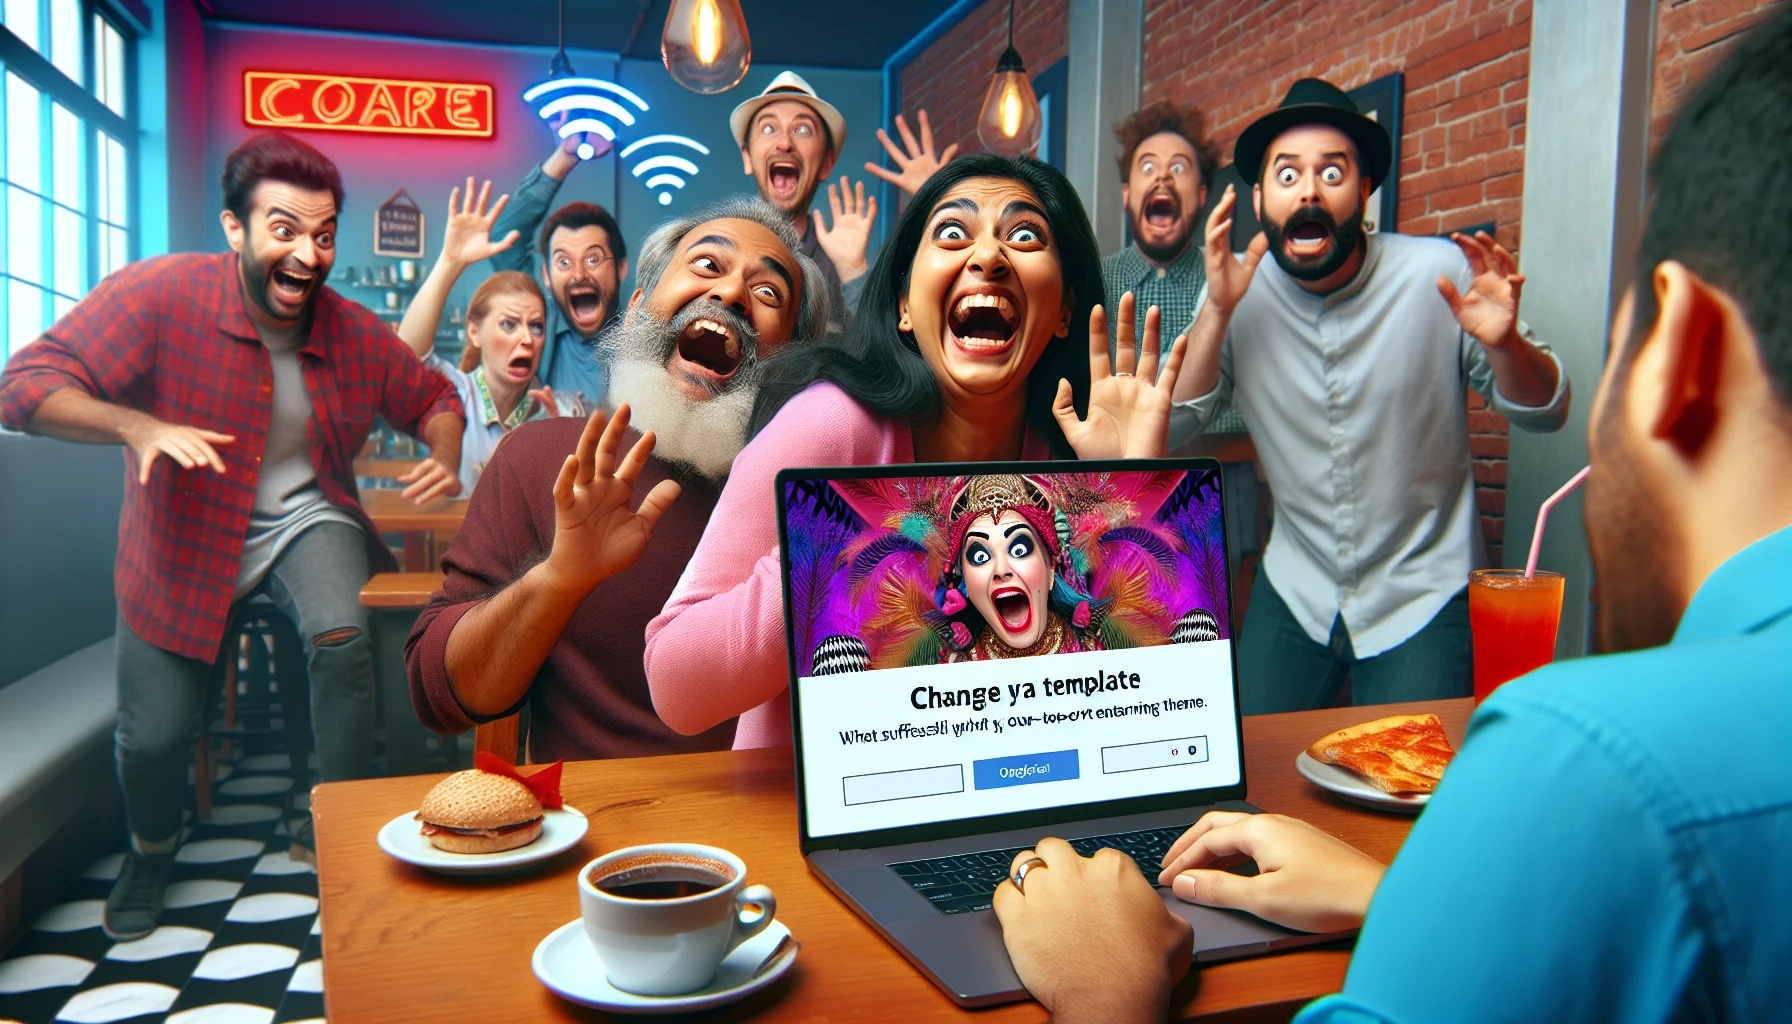 Create a humorous scenario representing the process of changing a template on a web hosting platform like Squarespace. The scene is set in a vibrant downtown cafe. A South Asian woman laughing hysterically peeks out from behind her laptop screen. She just successfully changed the template of her website and it’s now displaying the silliest, over-the-top entertaining theme. Panicked and surprised customers look on bewildered by the visual feast unfolding on the woman's computer screen. The cafe's Wi-Fi signal is seen prominently, symbolizing the internet hosting aspect.